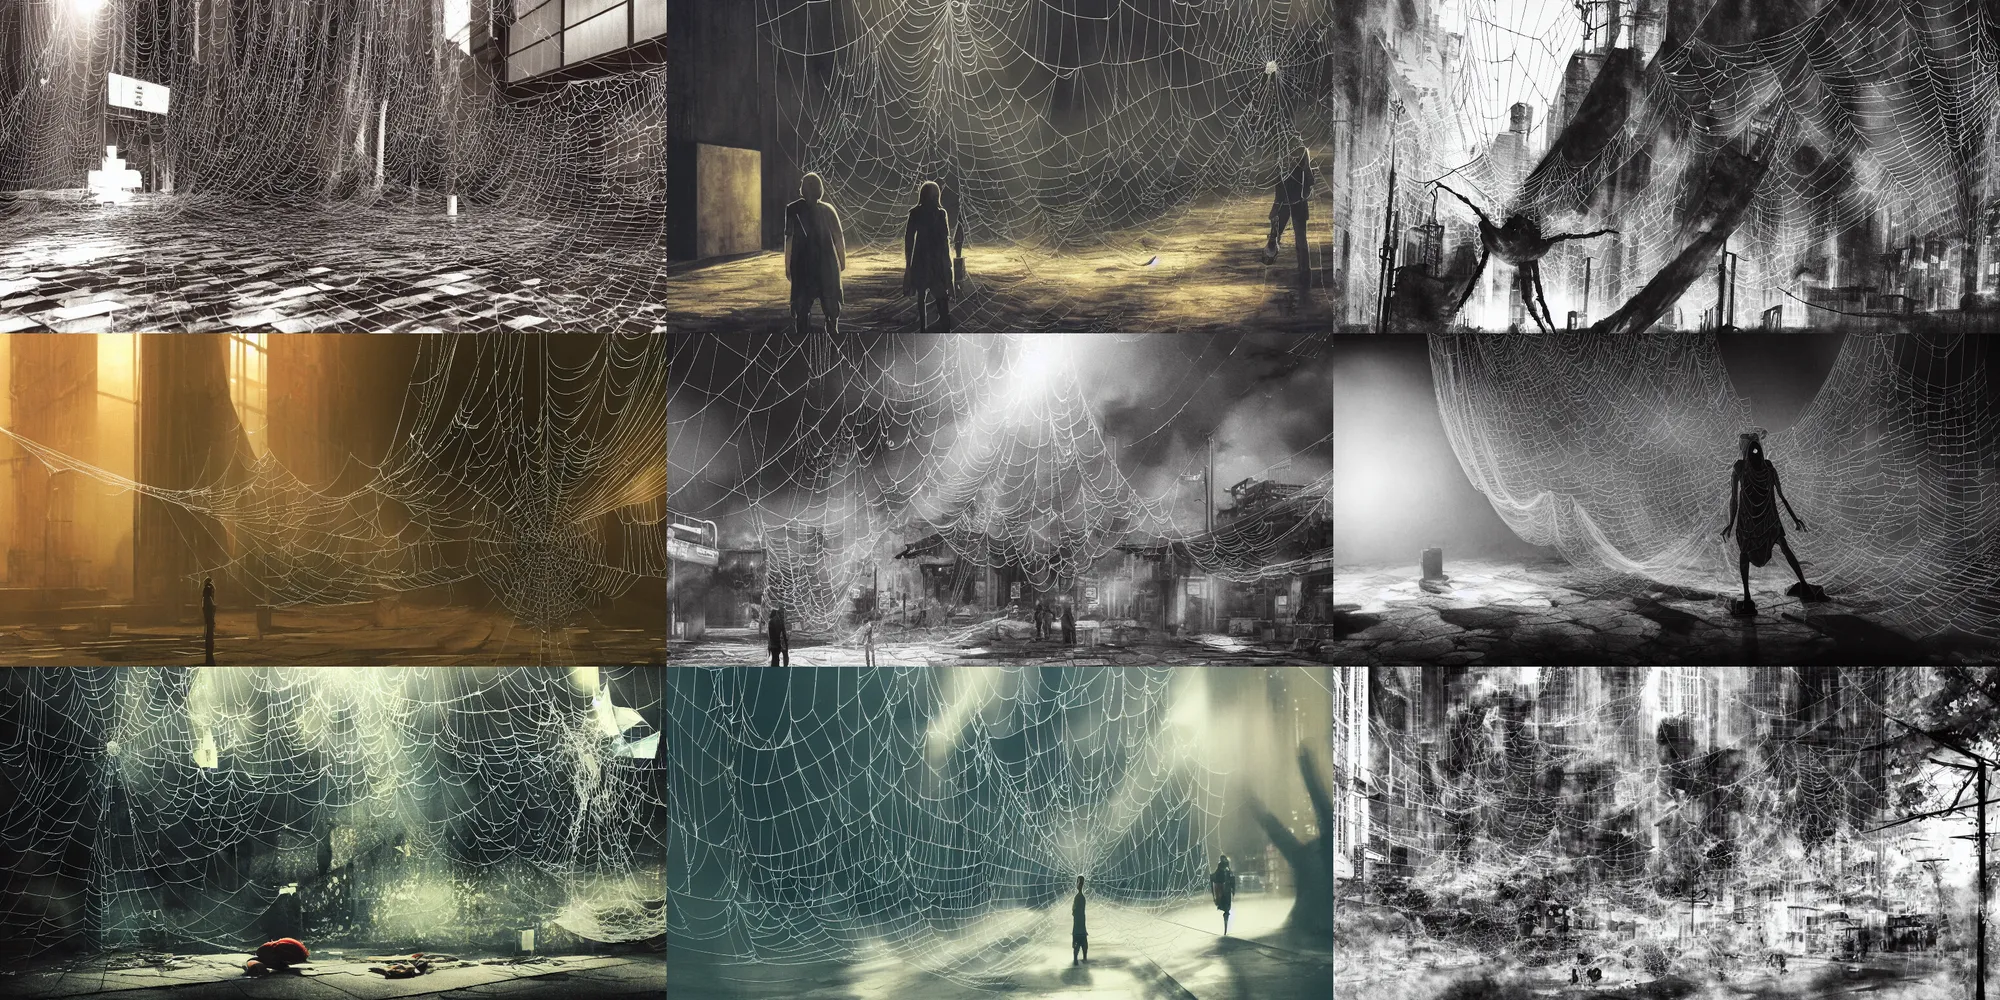 Prompt: anime movie scene, mamoru oshii, otomo, ultra wide, vanishing point, people wrapped up in web hanging, watercolor, spiderwebs, arachnophobia, dripping, sewer pipe entrance, giant spider foreground, sun beam, dusty volumetric light, back lit, paper texture, spider nest, deserted shinjuku junk, brutalist, golden ratio